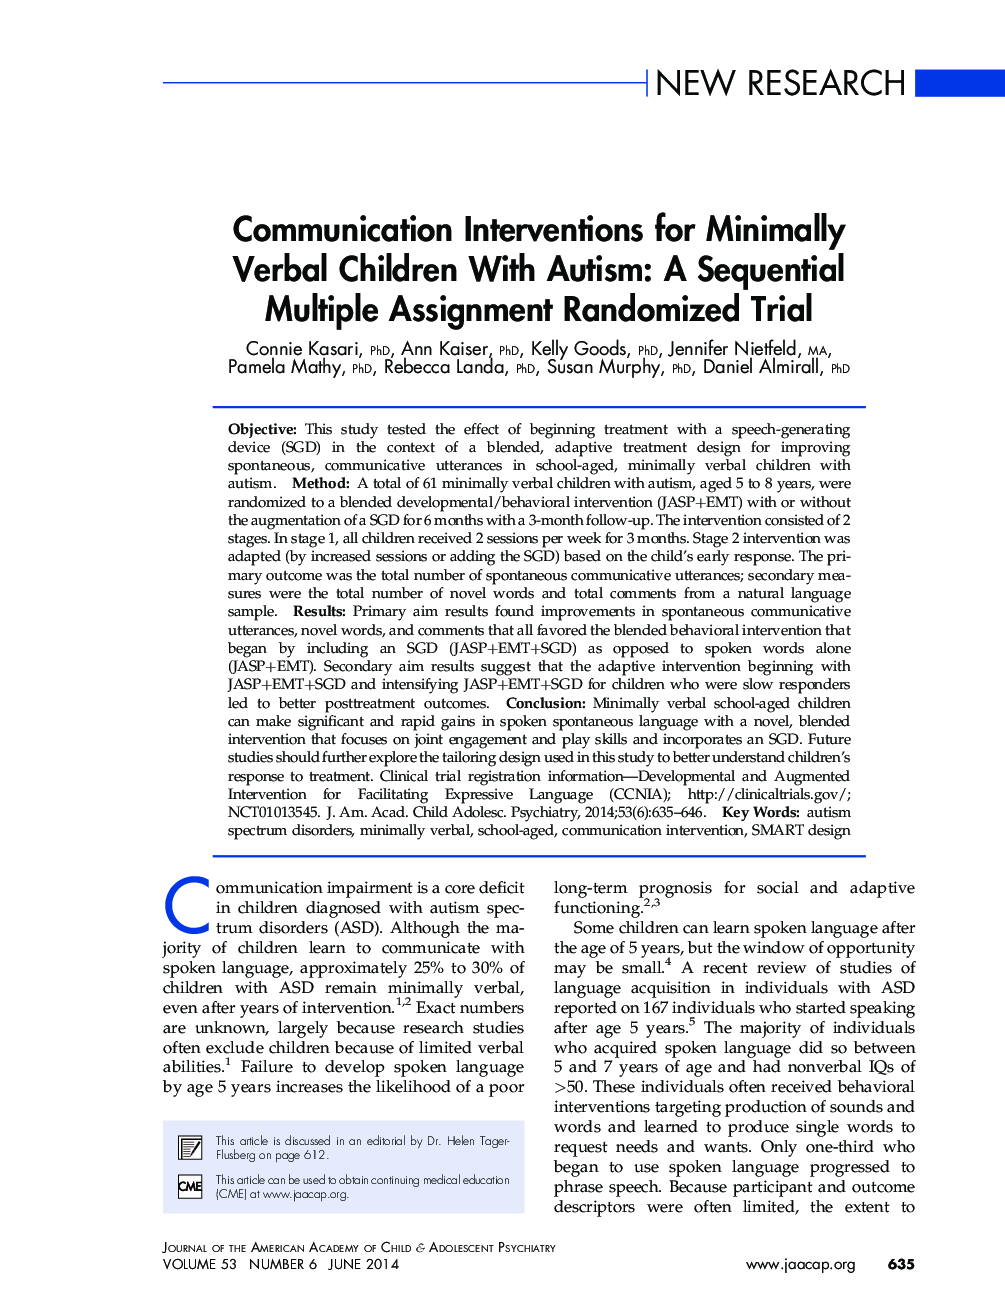 Communication Interventions for Minimally Verbal Children With Autism: A Sequential Multiple Assignment Randomized Trial